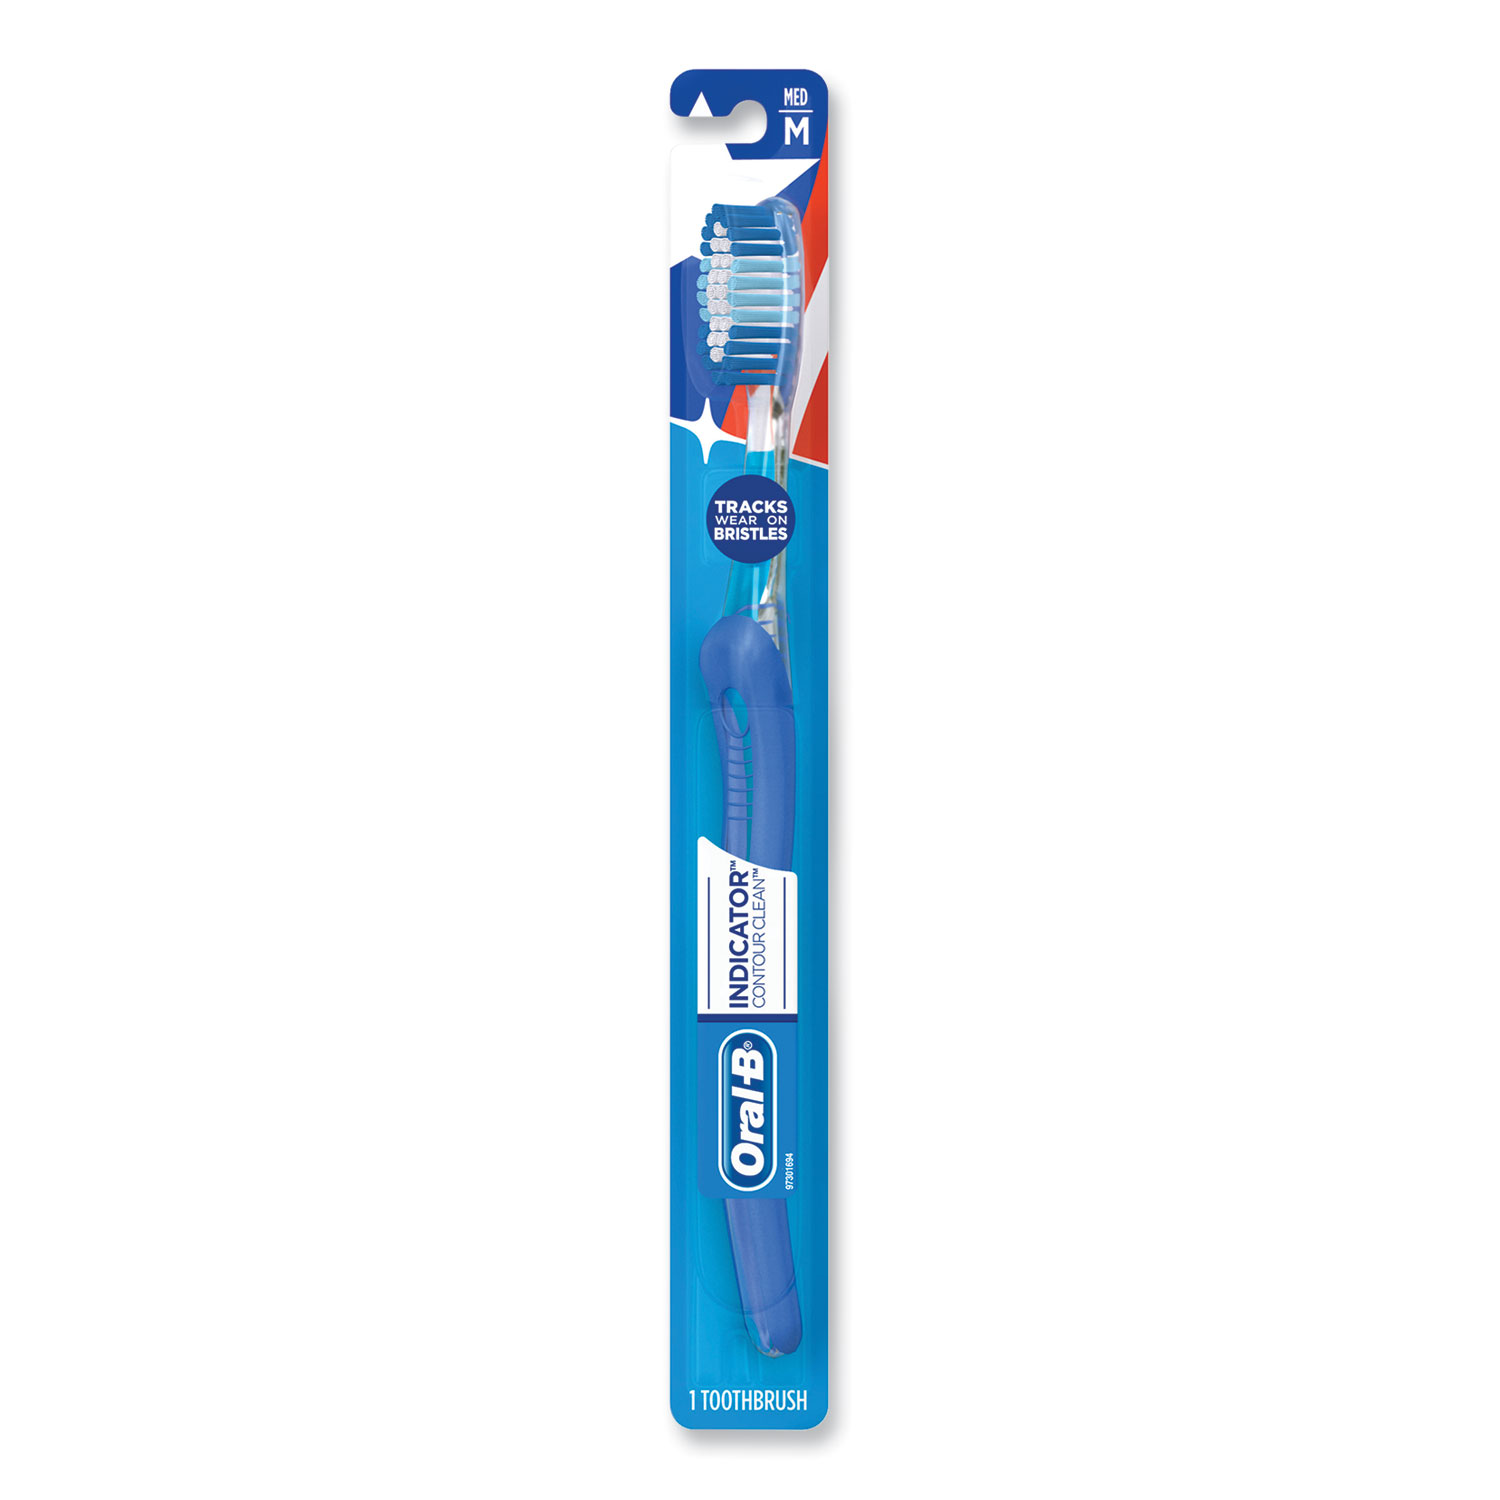  Oral-B 80200 Indicator Contour Clean Soft Toothbrush, Blue (PGC1703188) 